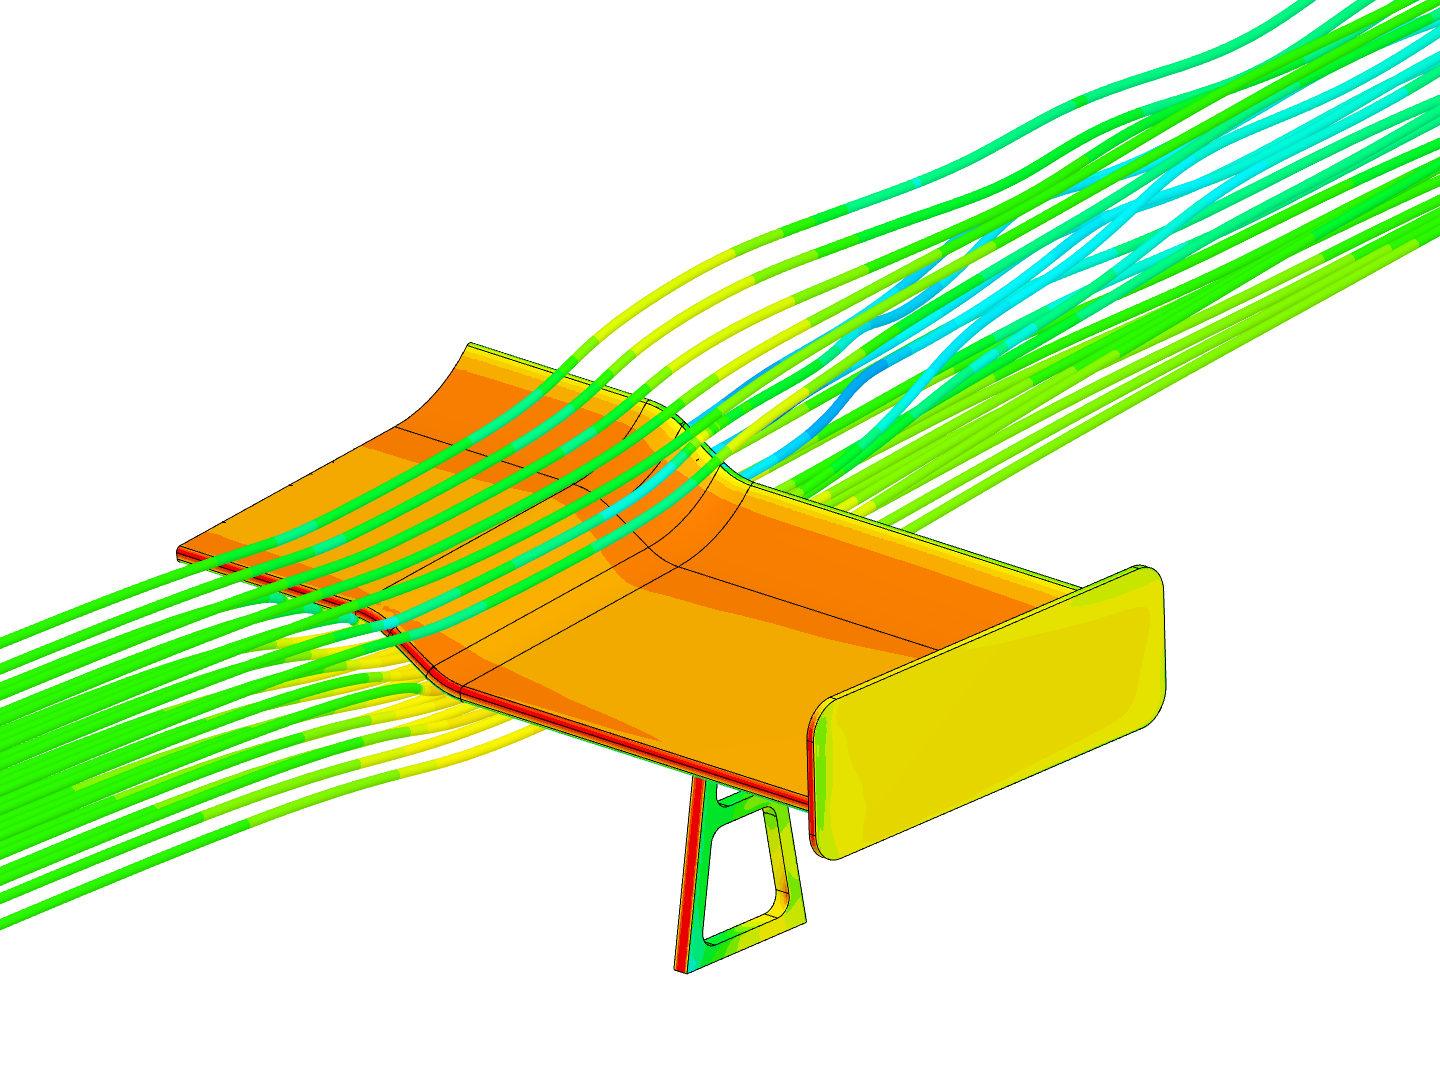 Coursera - CFD Airflow image